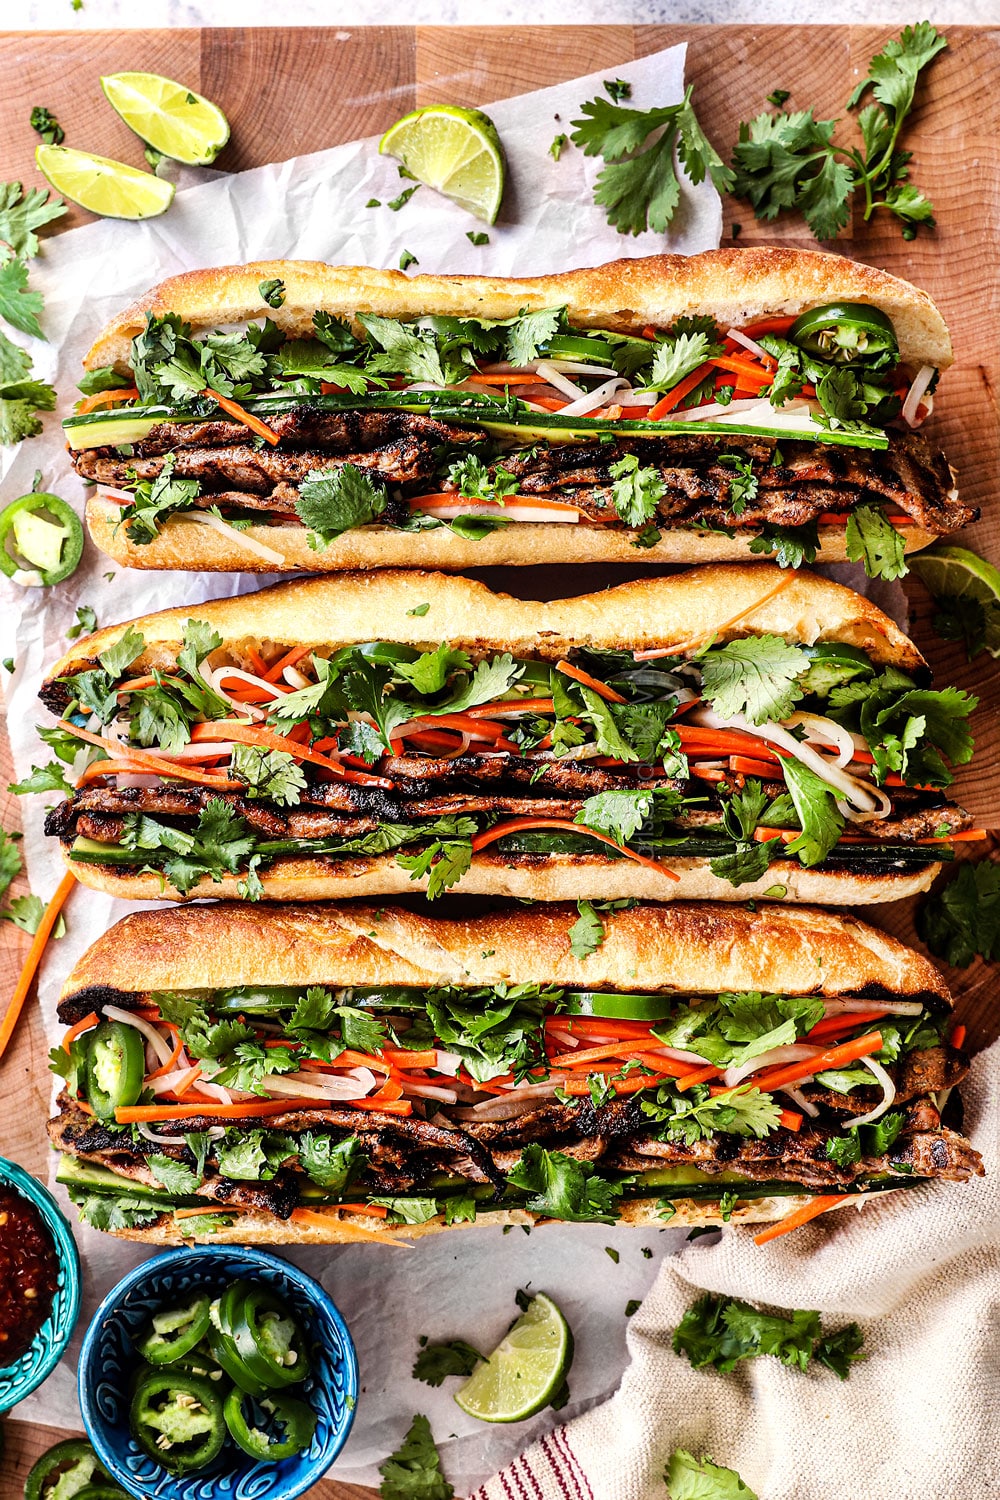 A banh mi sandwich is presented on a wooden table, showcasing a toasted baguette filled with grilled meats, pickled vegetables, fresh cilantro, jalapeño slices and accompanied by lime wedges.